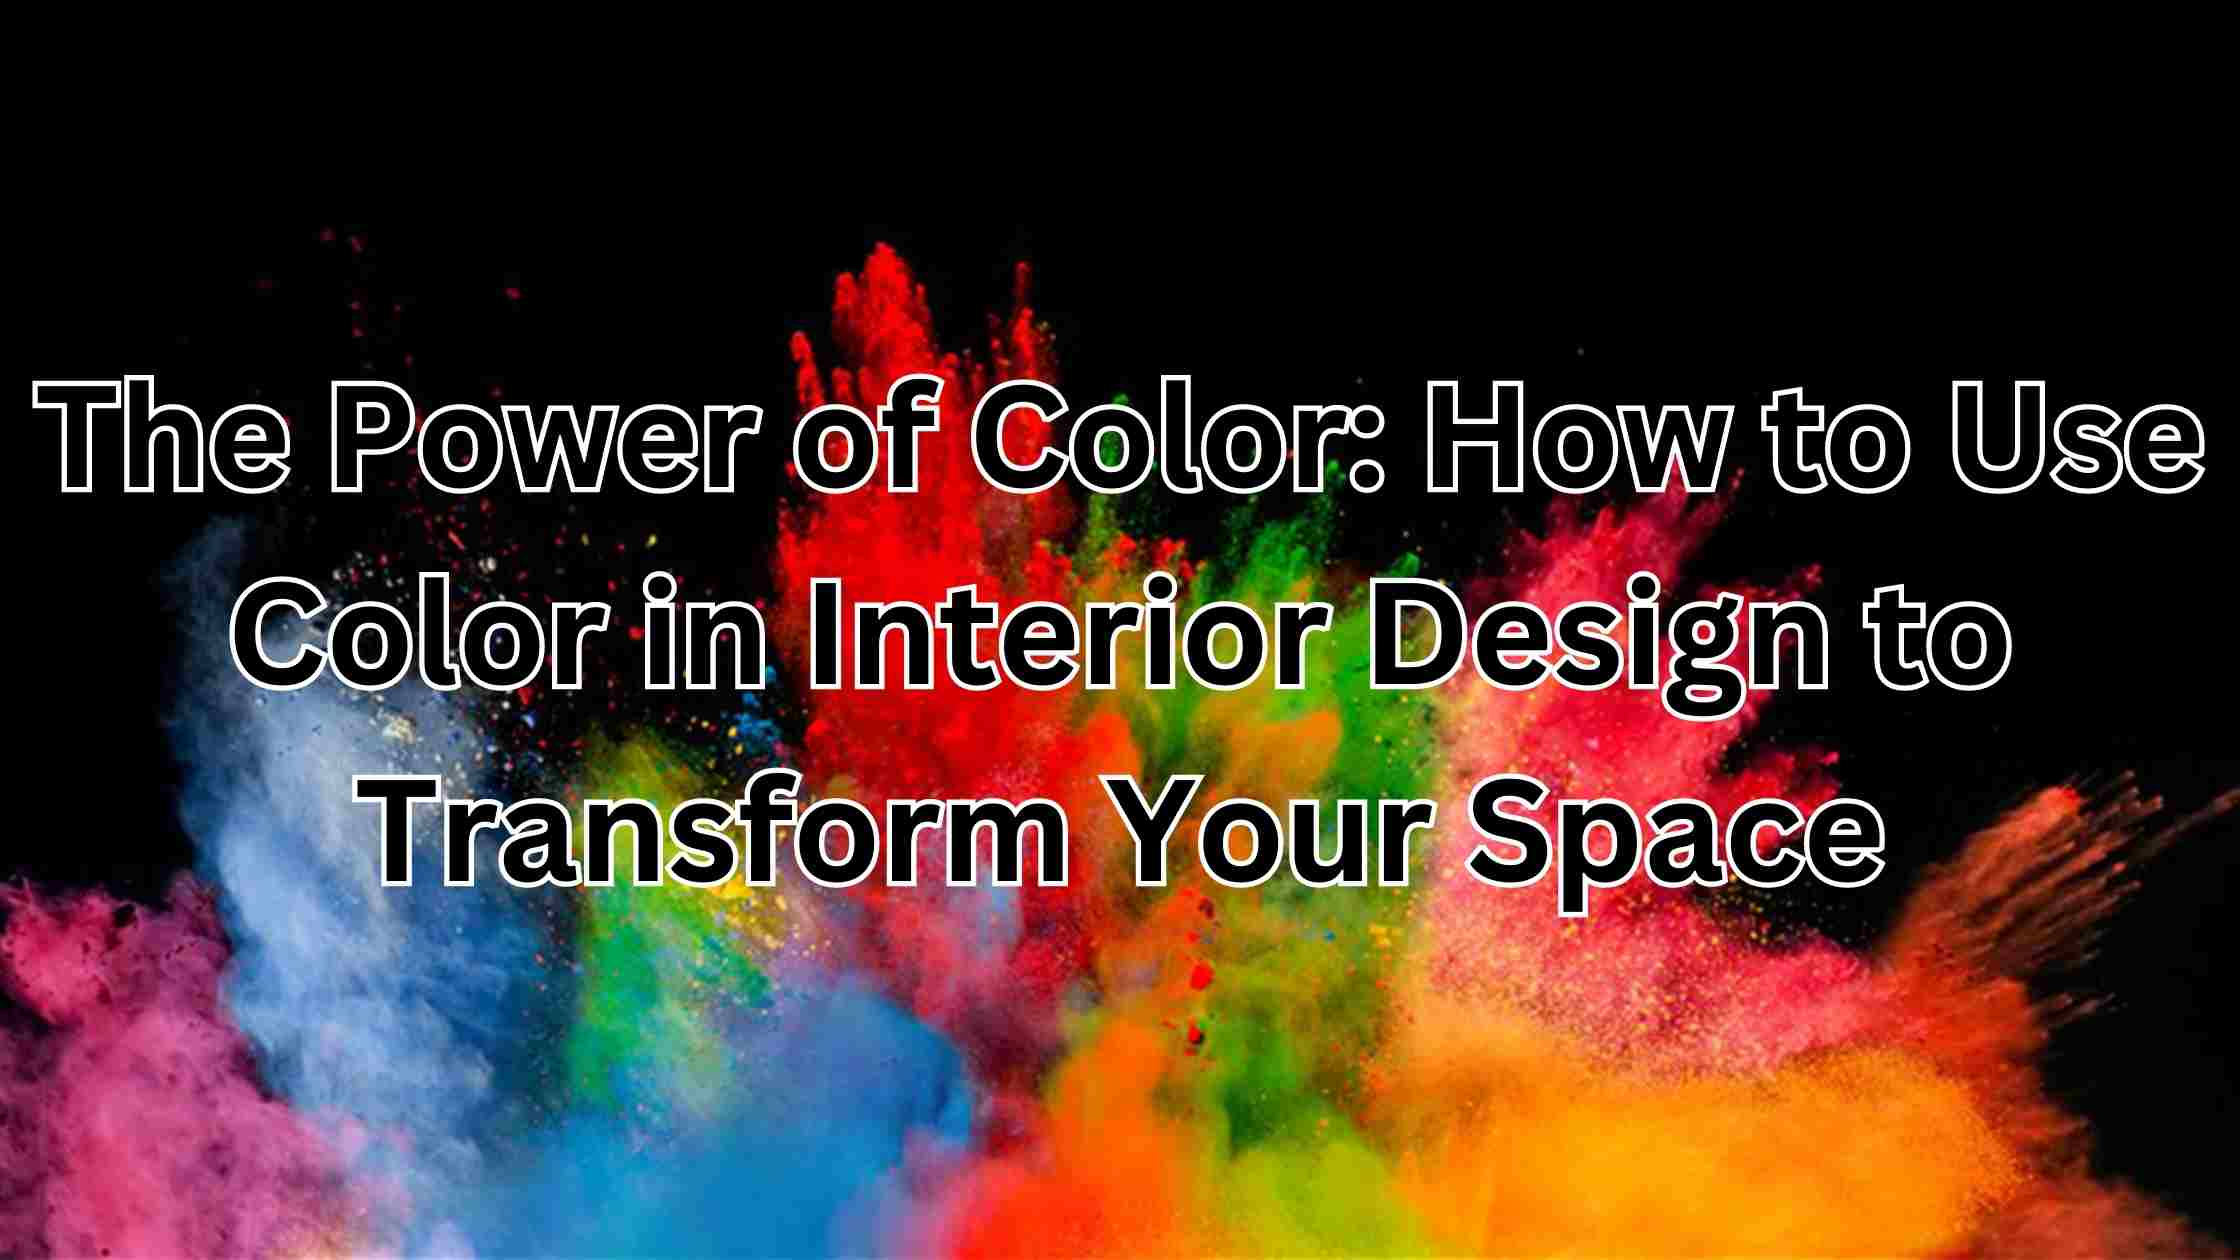 The Power of Color: How to Use Color in Interior Design to Transform Your Space